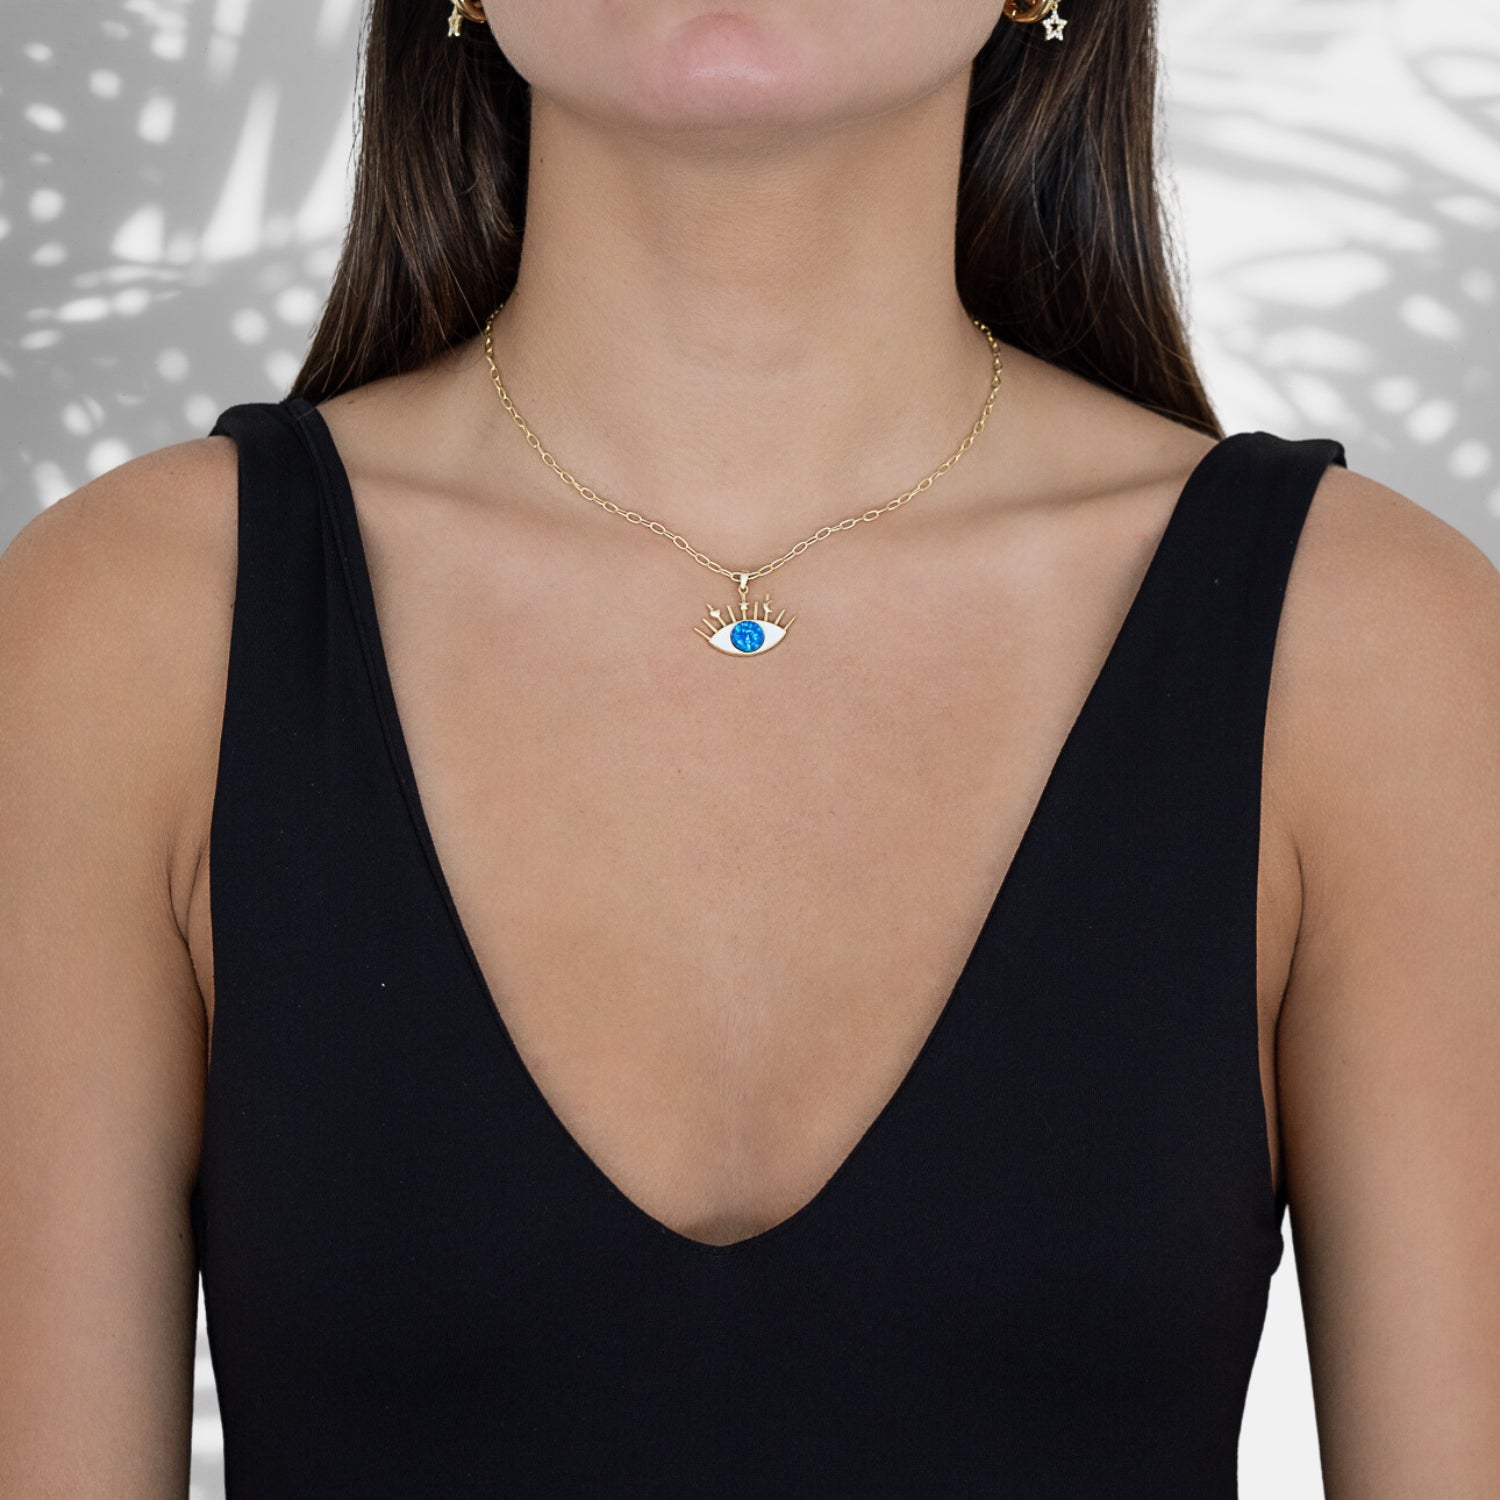 A model wearing the Silver Blue Opal Evil Eye Necklace, radiating style and spiritual energy.